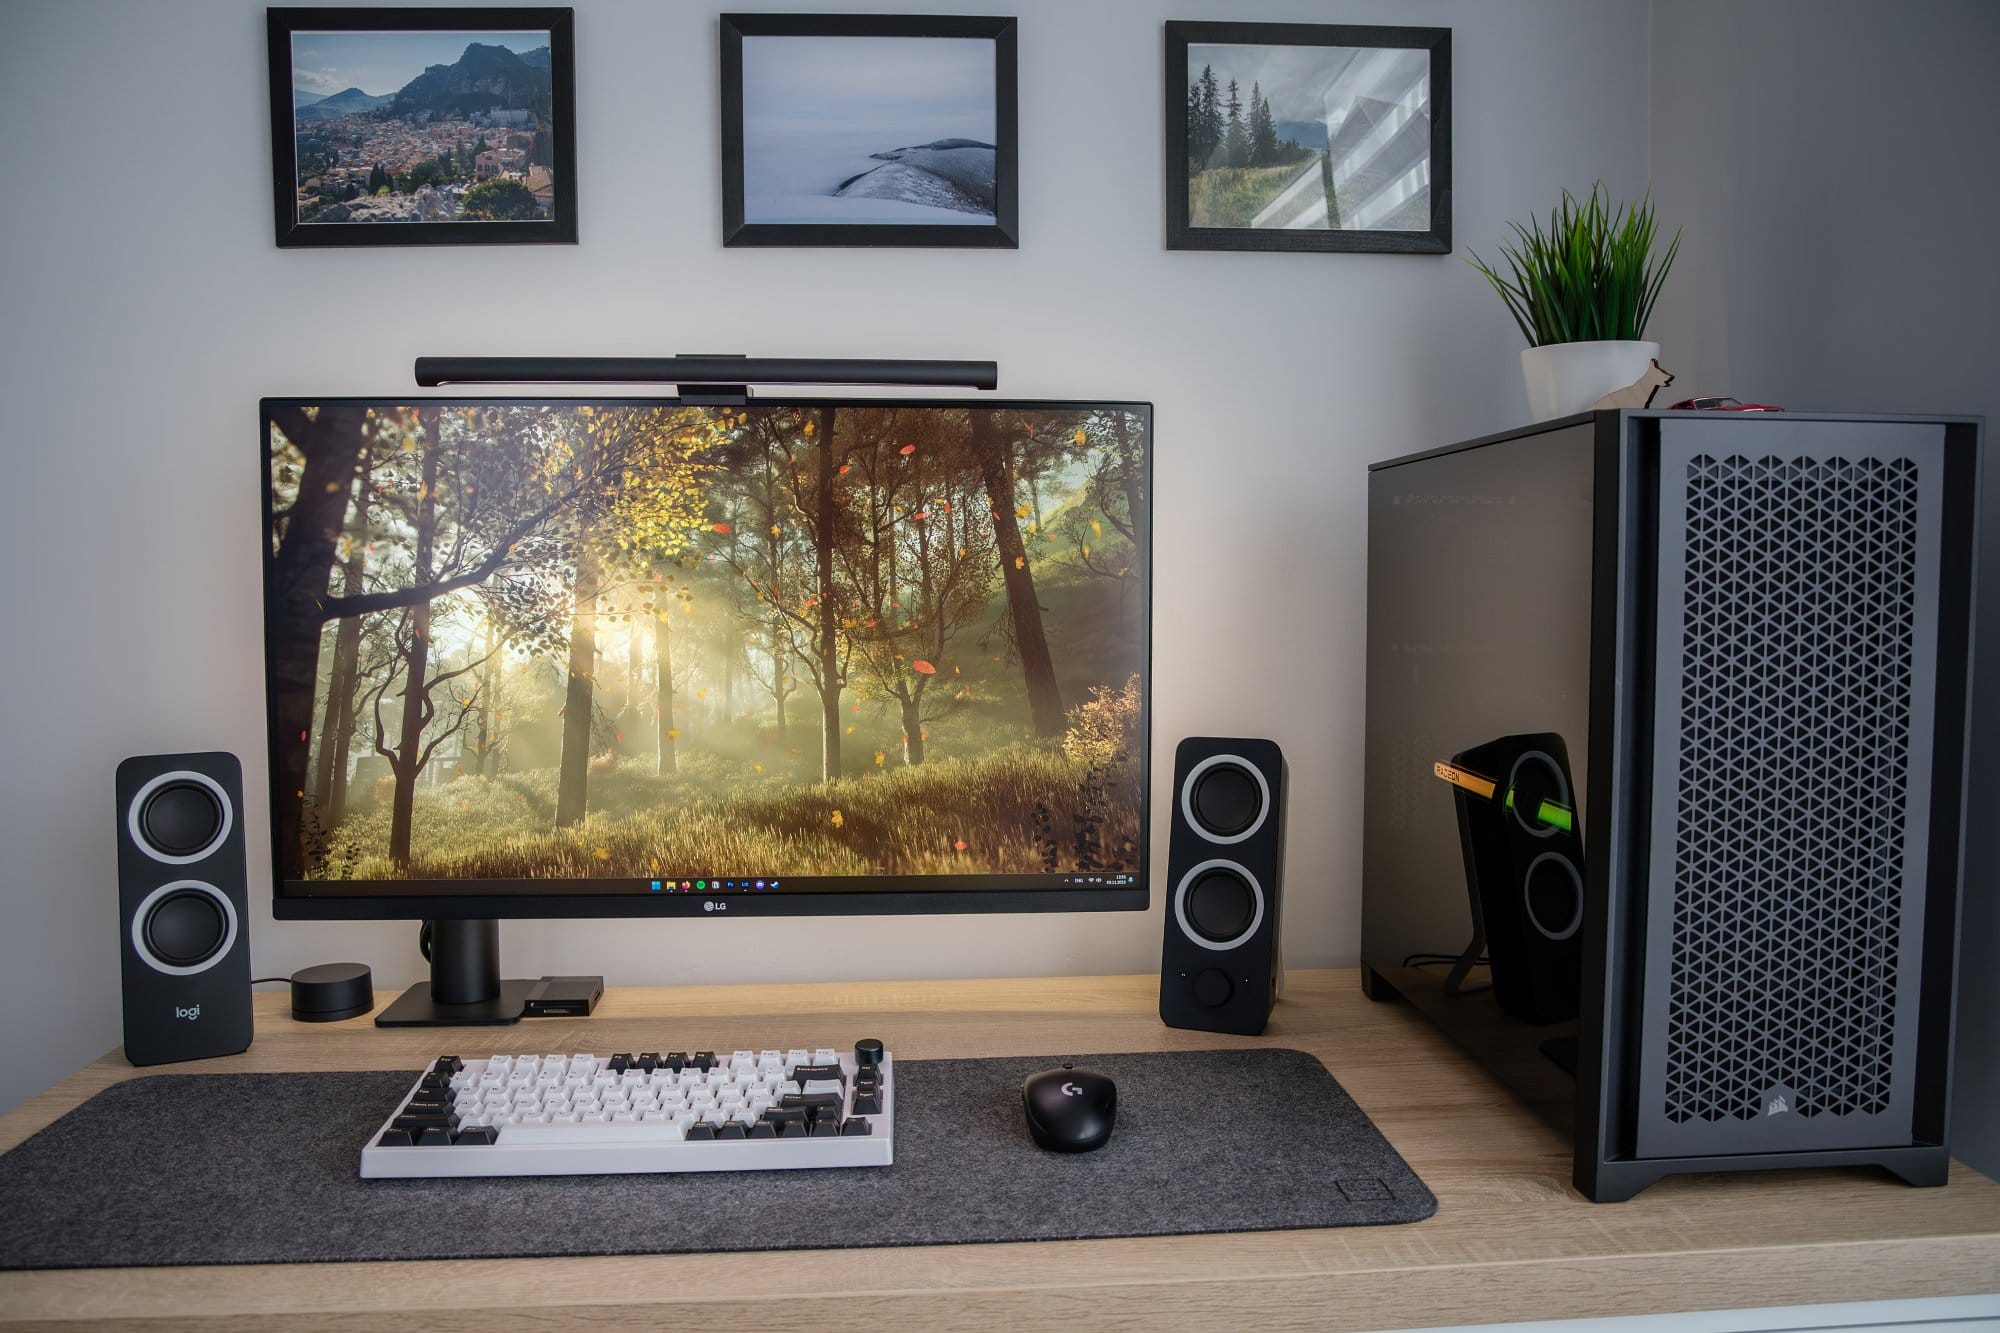 A close-up view of a well-organised desk with a mechanical keyboard and ergonomic mouse, flanked by stereo speakers, next to a high-end computer tower and a monitor displaying an autumnal forest scene